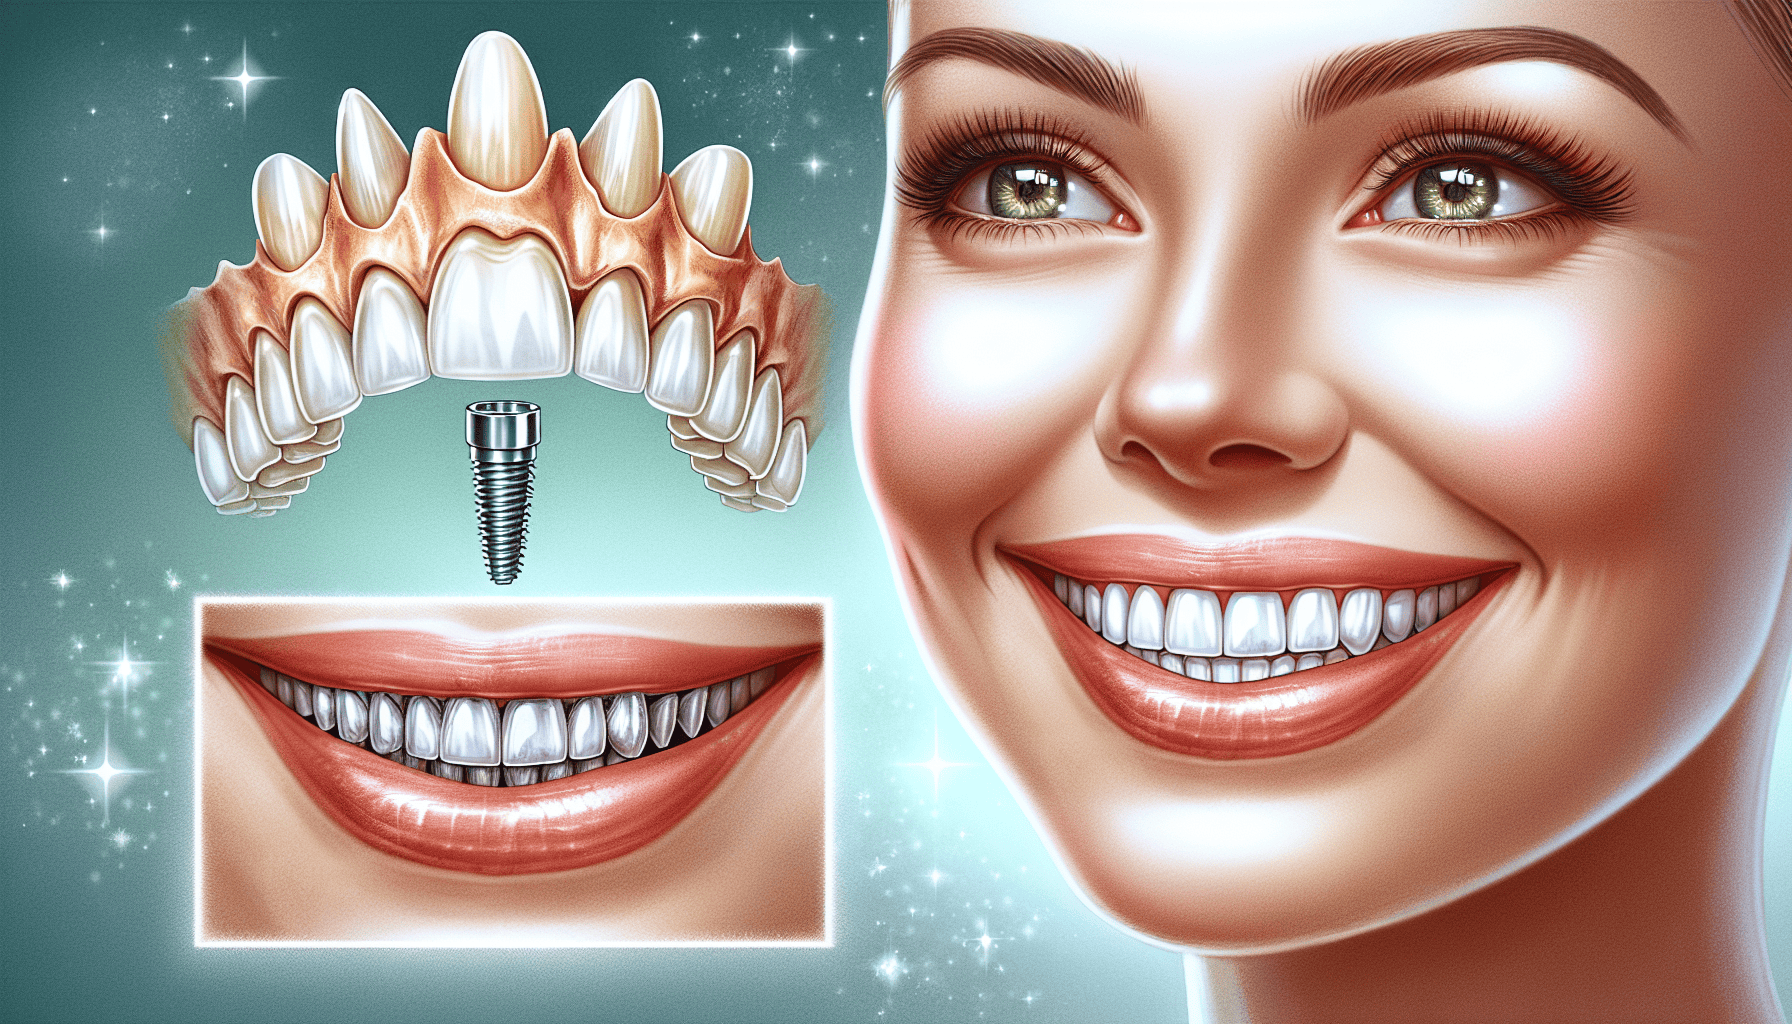 Illustration of ceramic implants as a biocompatible choice for replacing missing teeth